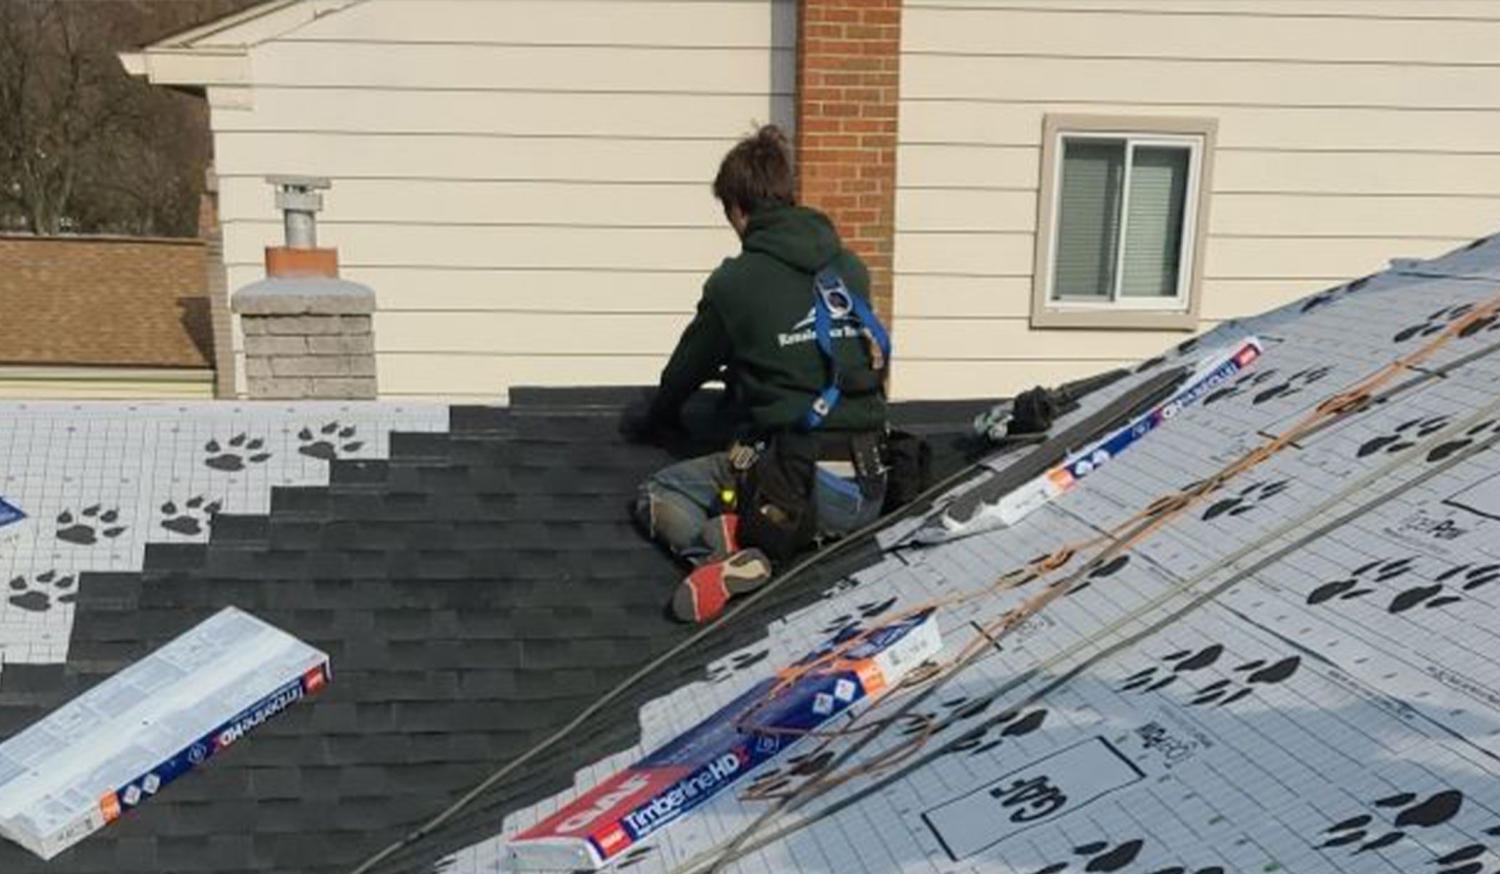 Your new roof shingles and hip/ridge is installed paying close attention to all detail.